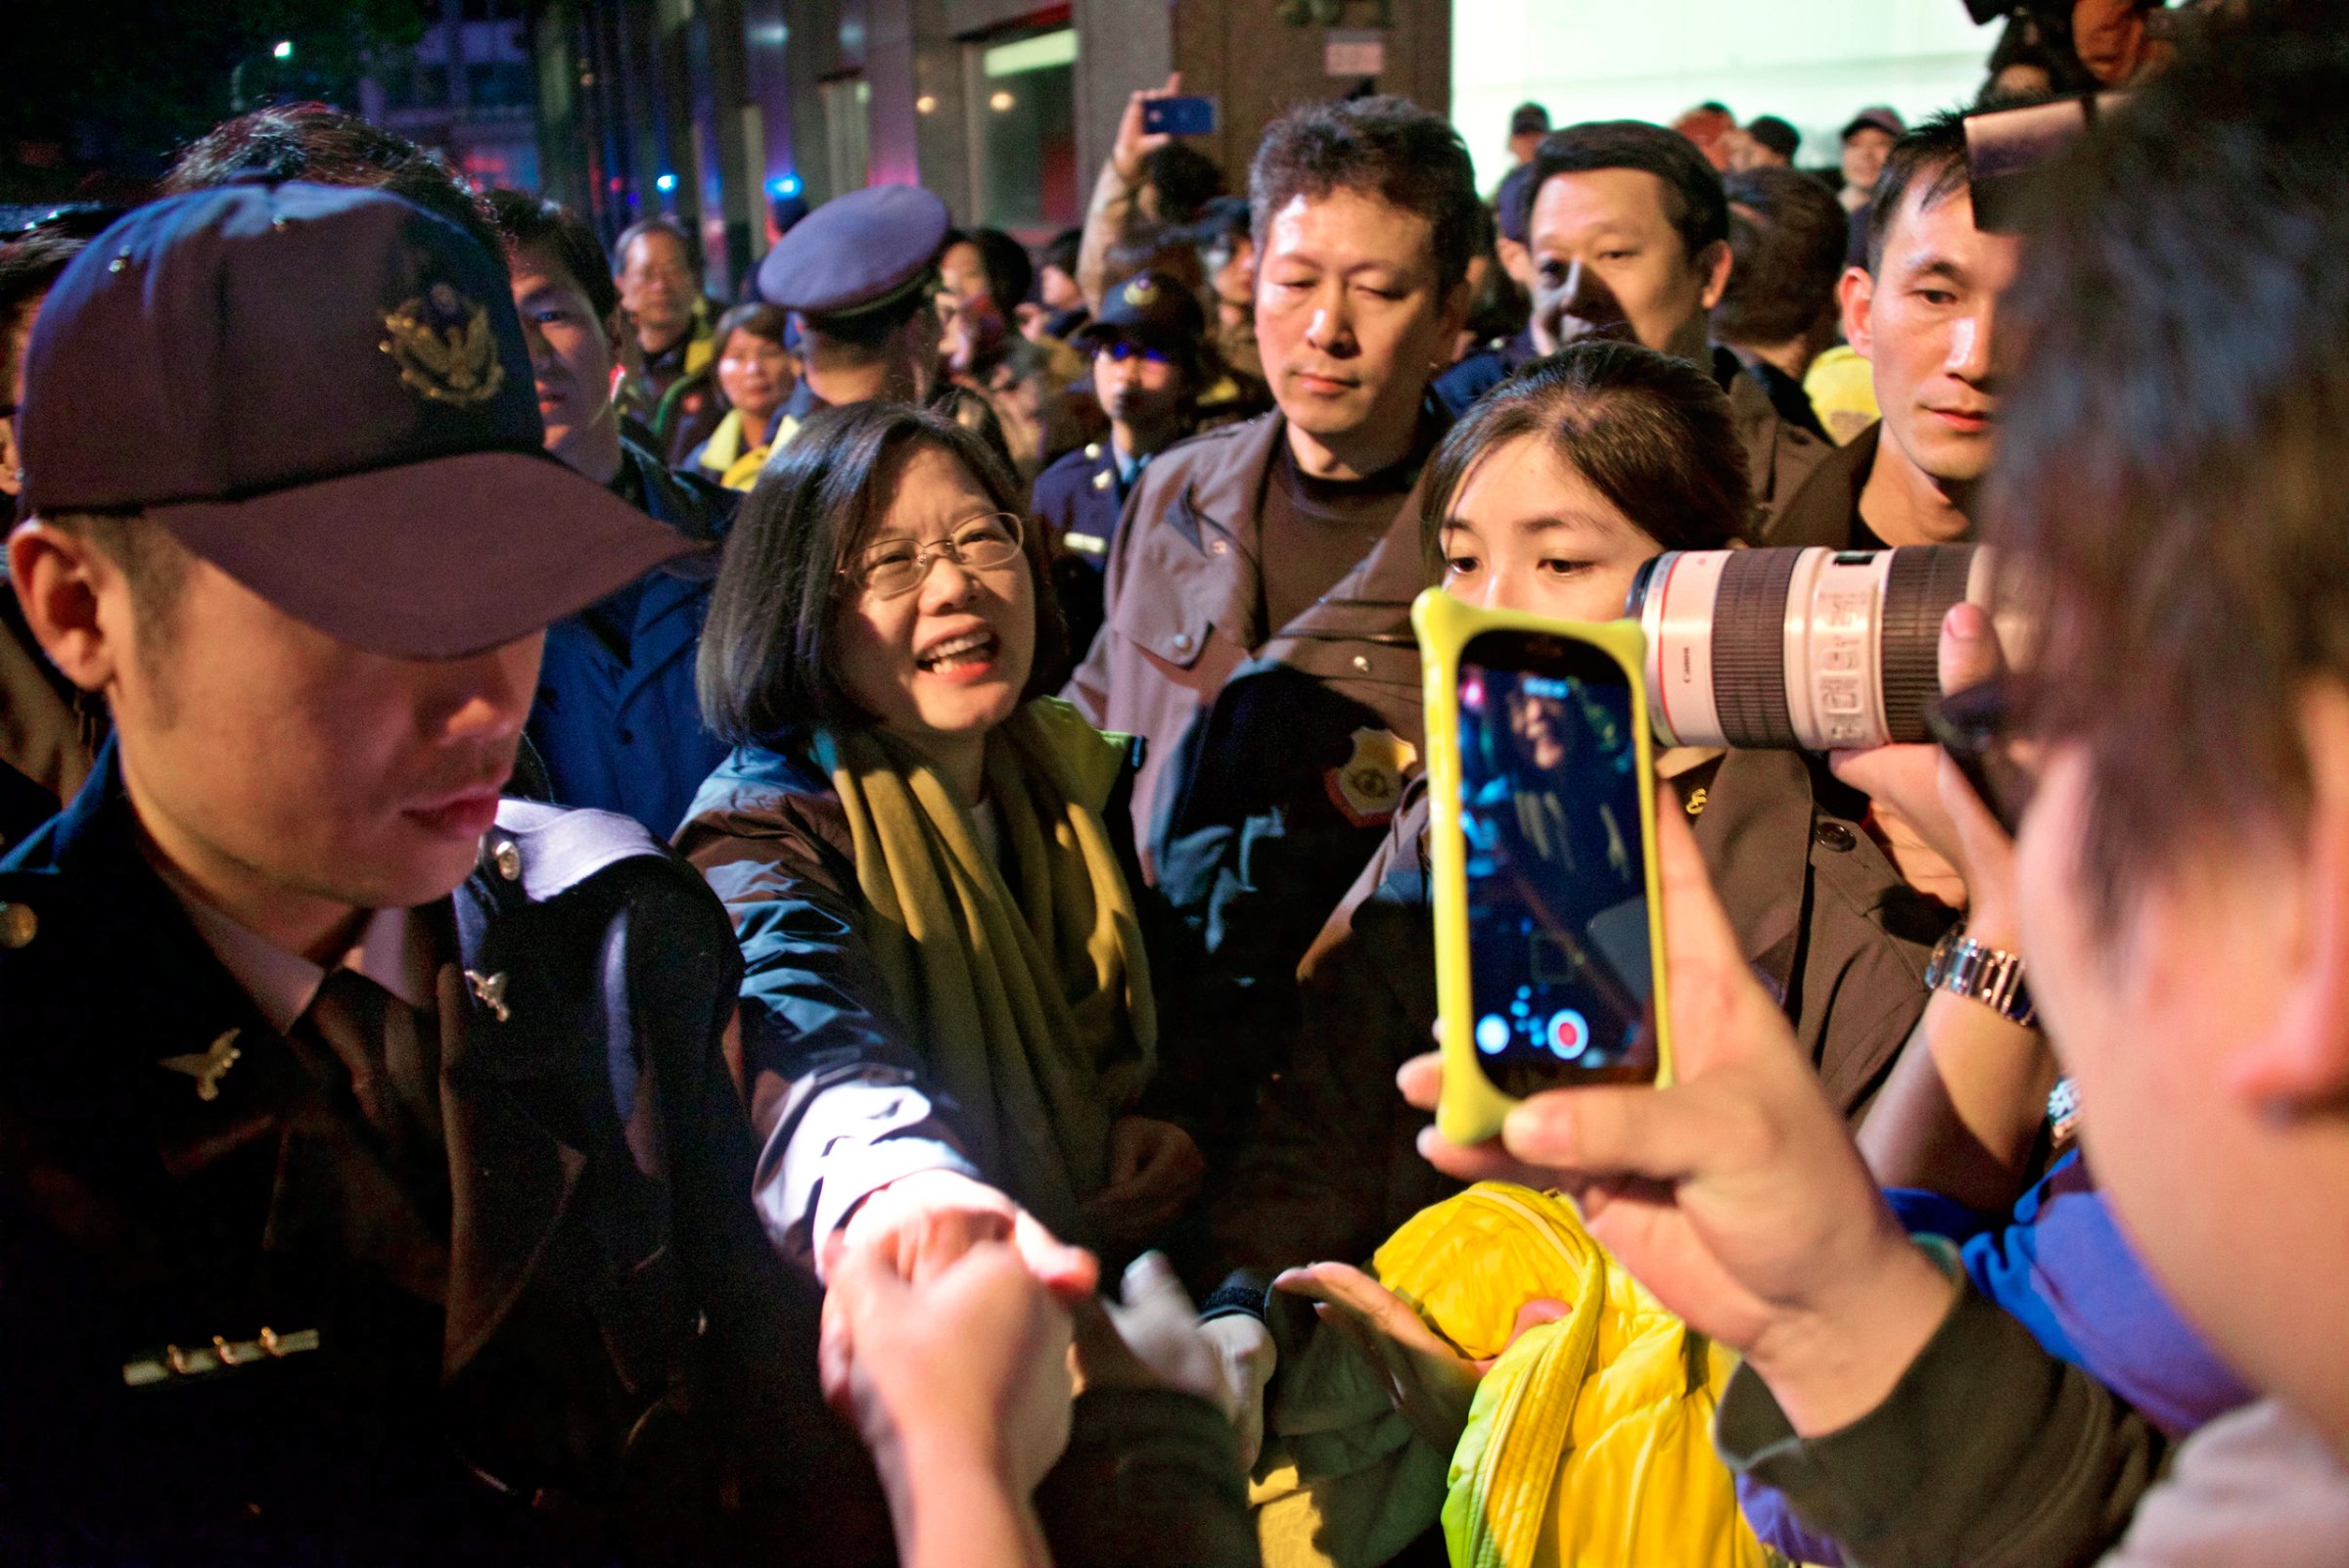 Tsai Ing-wen greets members of the public on January 16, 2016, as she leaves the DPP headquarters celebrations in Taipei, Taiwan.